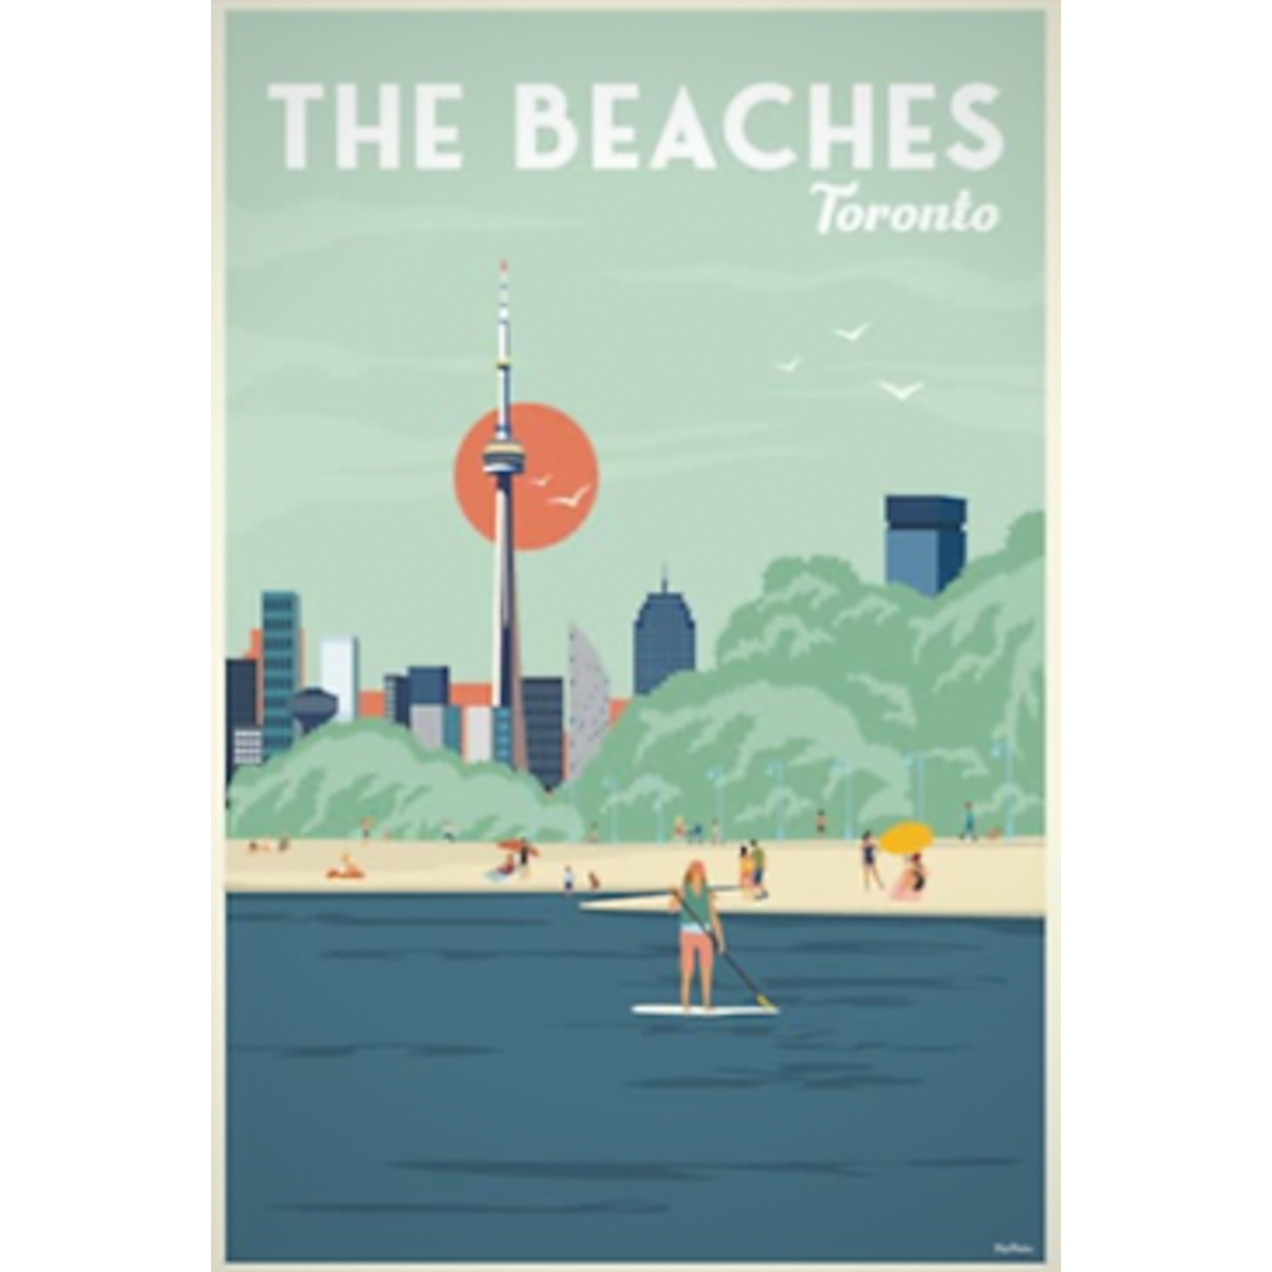 Gotstyle Fashion - TripPoster Gifts 5 x 7in Poster - Toronto Beaches